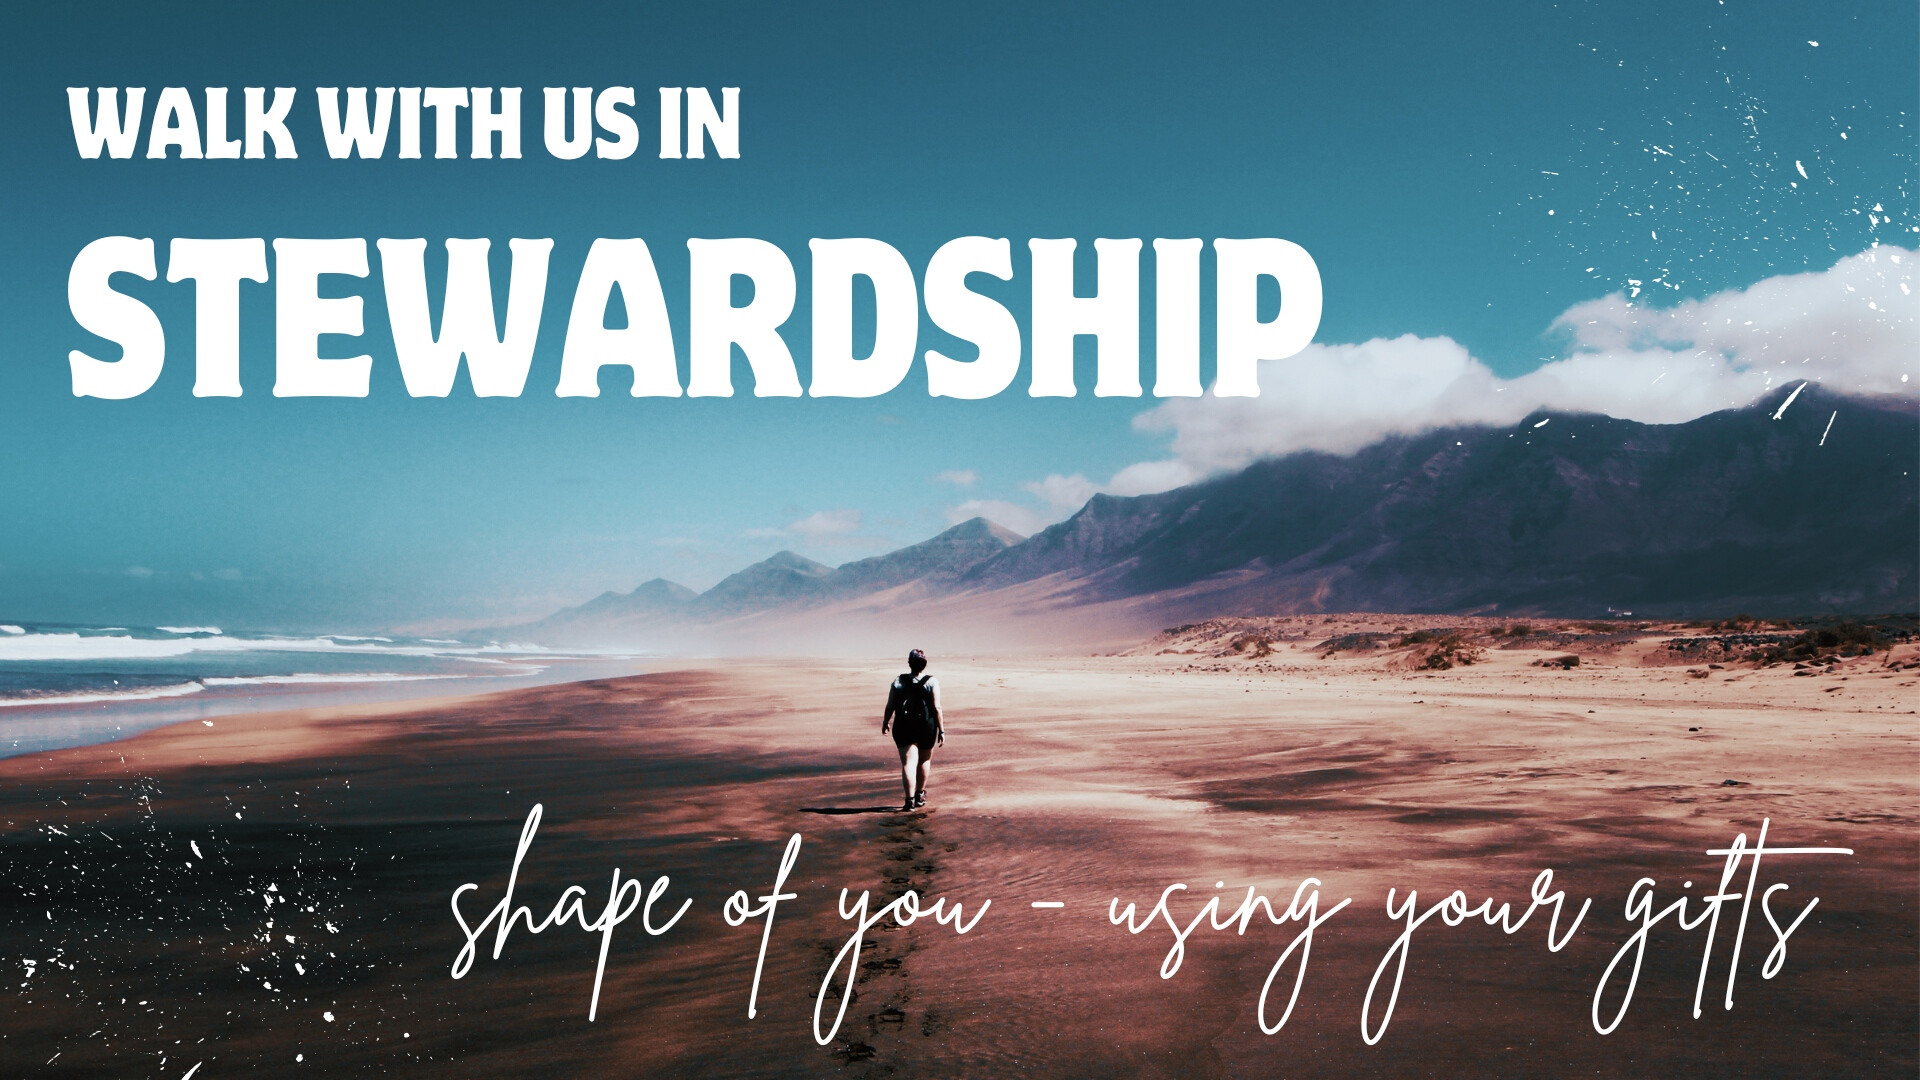 Walk With Us in Stewardship - Shape of You, Children's Message